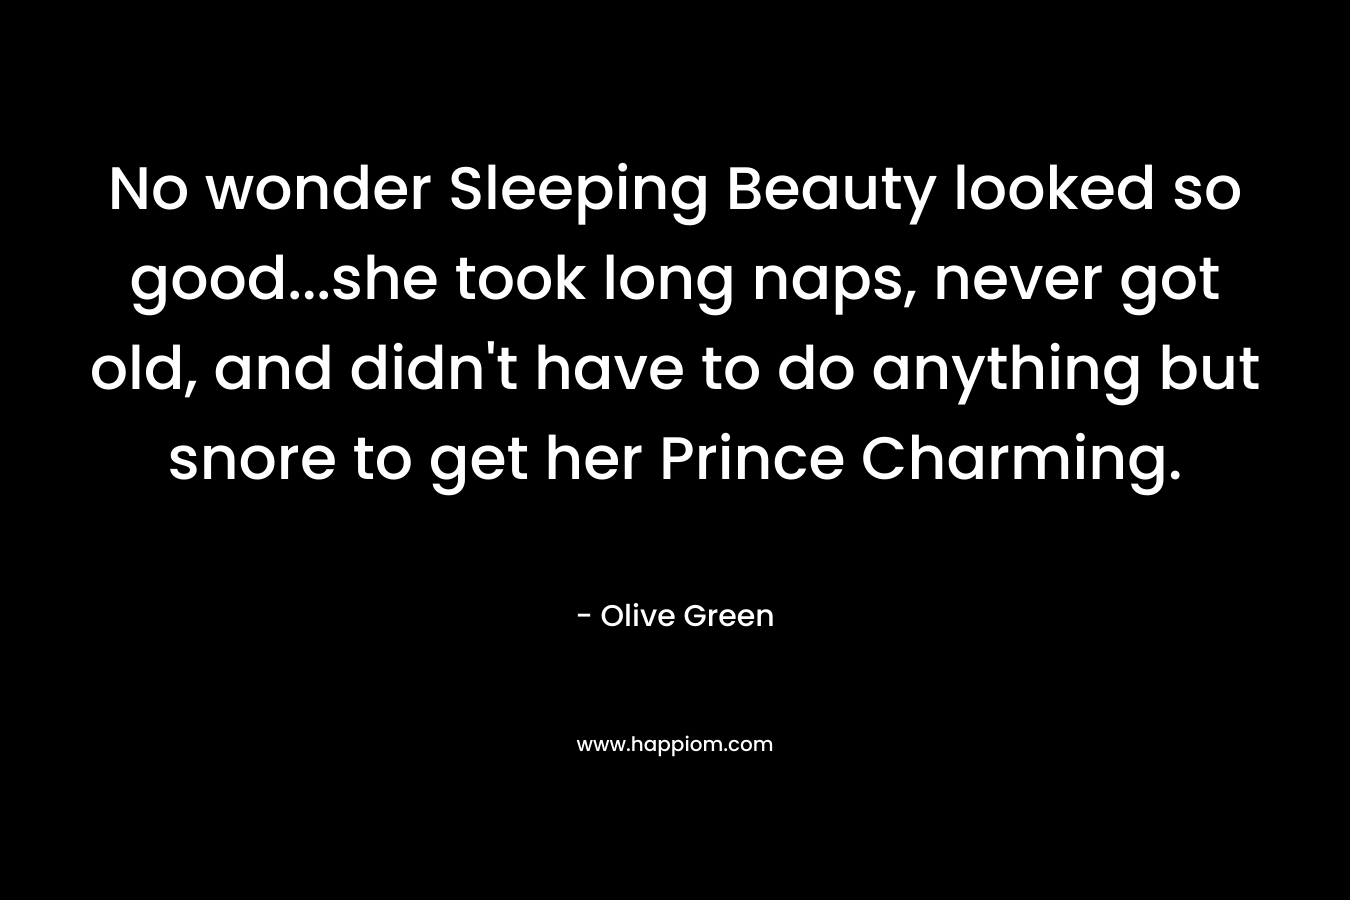 No wonder Sleeping Beauty looked so good...she took long naps, never got old, and didn't have to do anything but snore to get her Prince Charming.